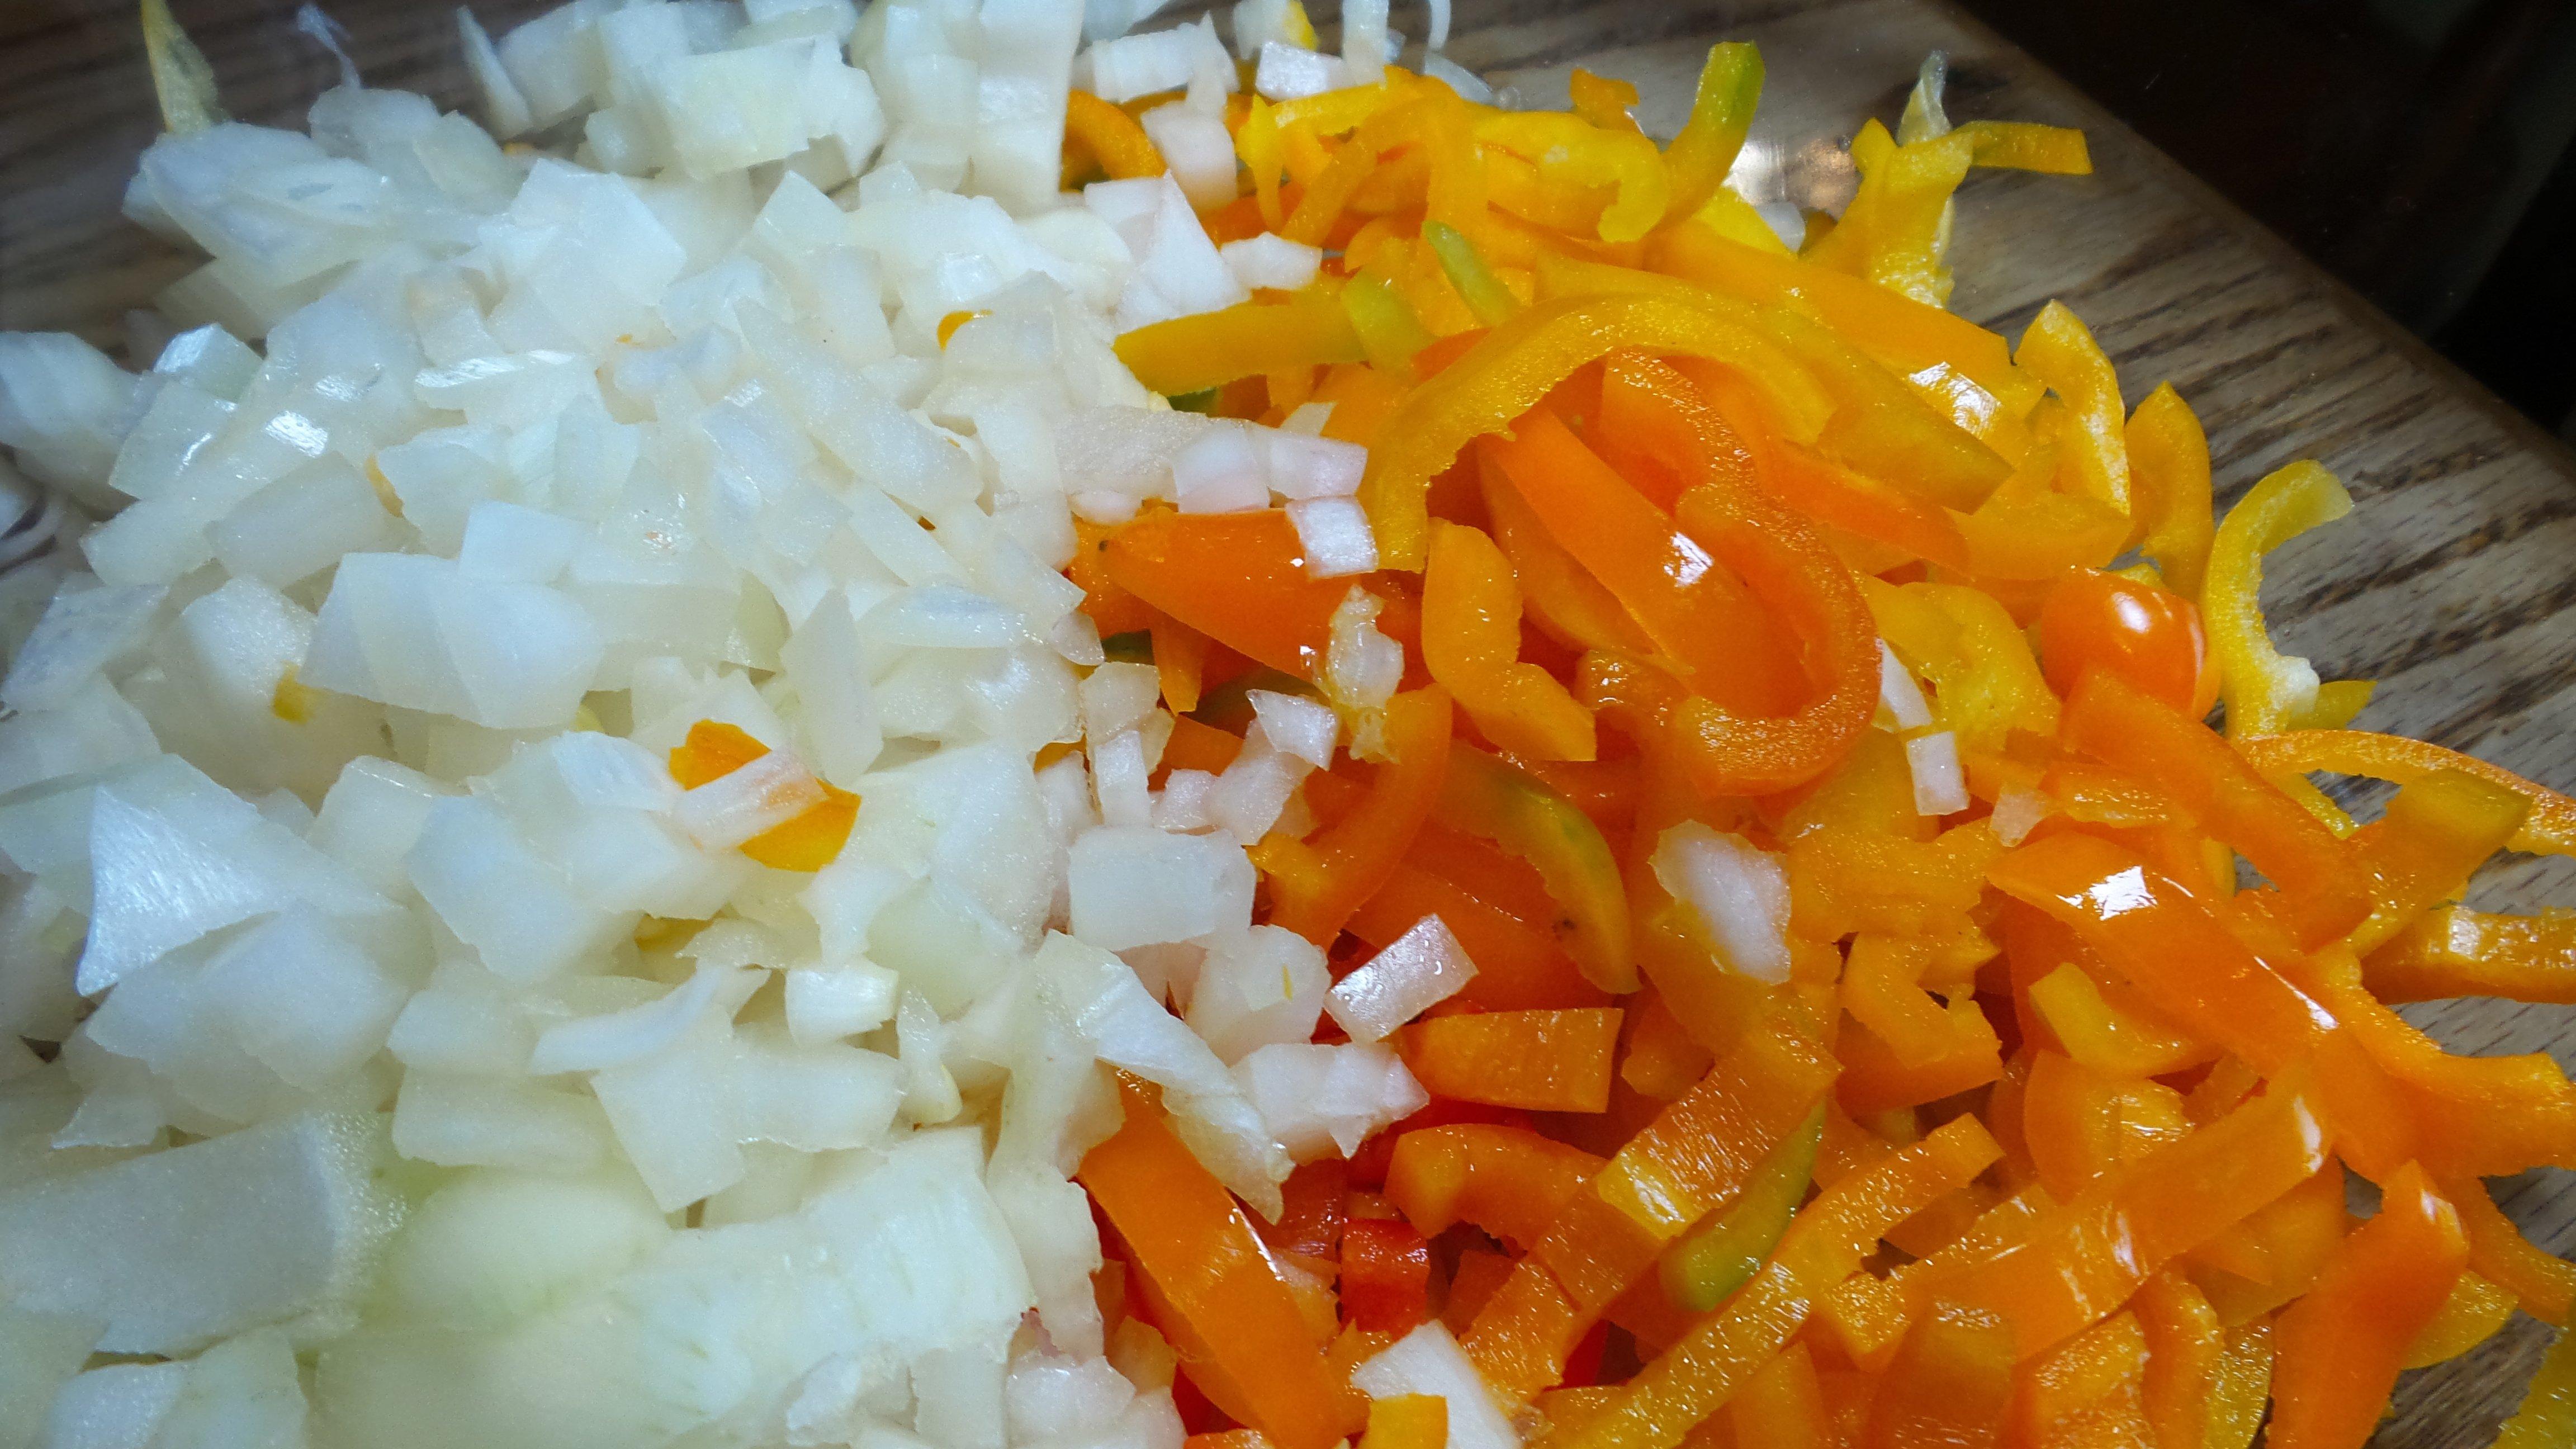 Dice the peppers and onions into a fine chop.